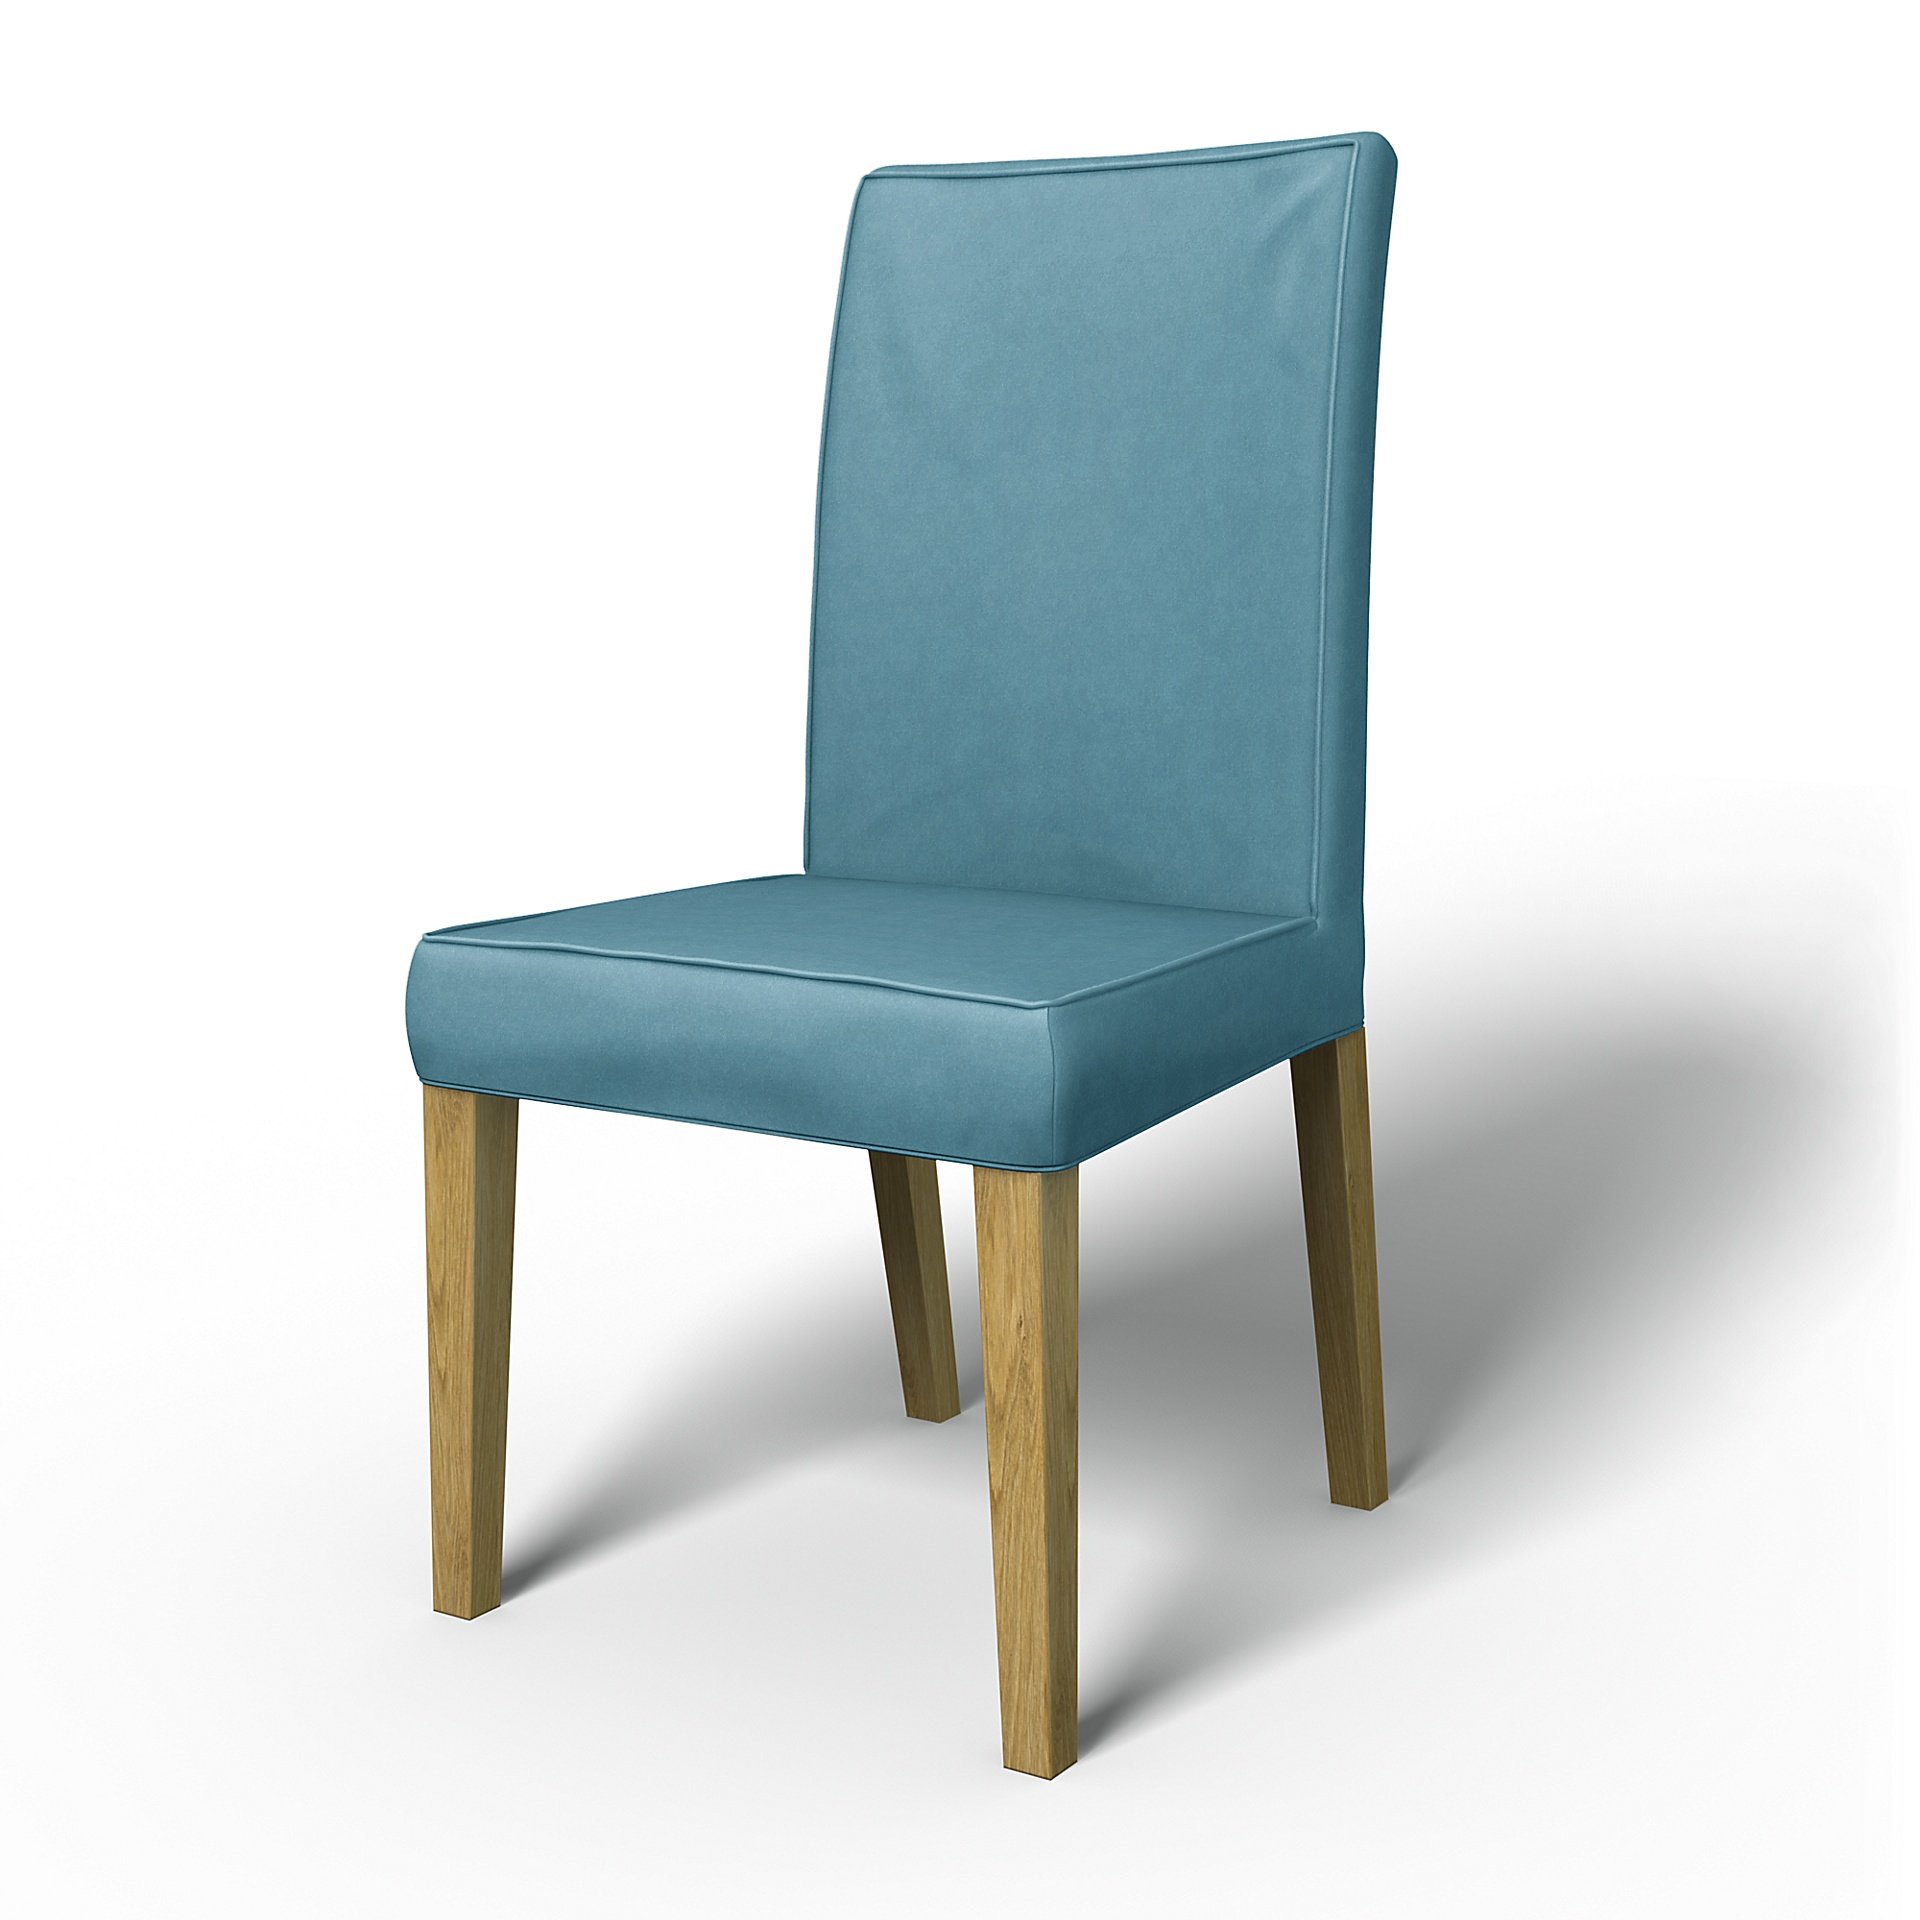 IKEA - Henriksdal Dining Chair Cover with piping (Standard model), Dusk Blue, Outdoor - Bemz